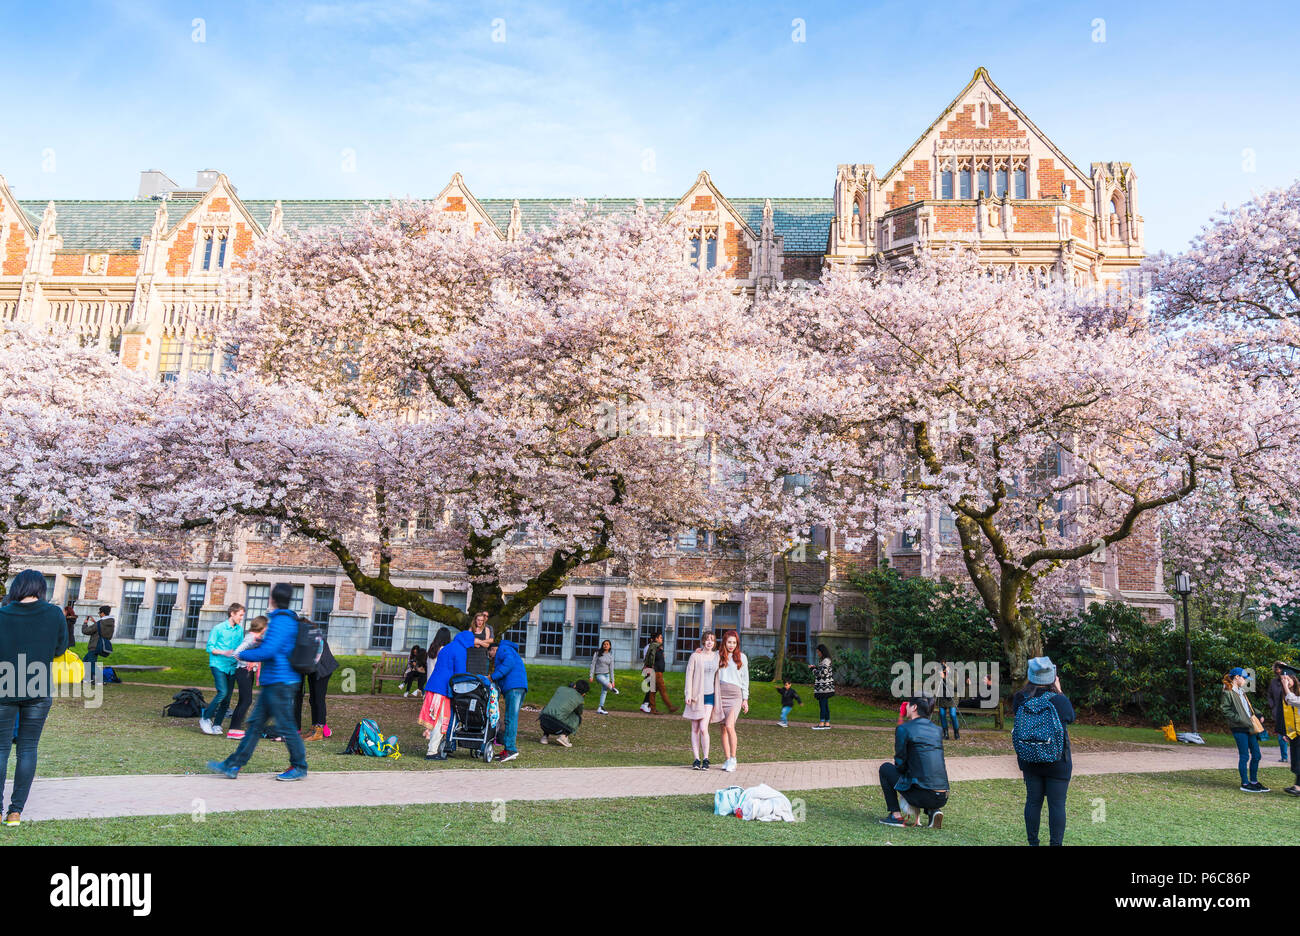 university of Washington,Seattle,washingto n,usa. 04-03-2017: cherry blossom blooming in the garden with crowded. Stock Photo